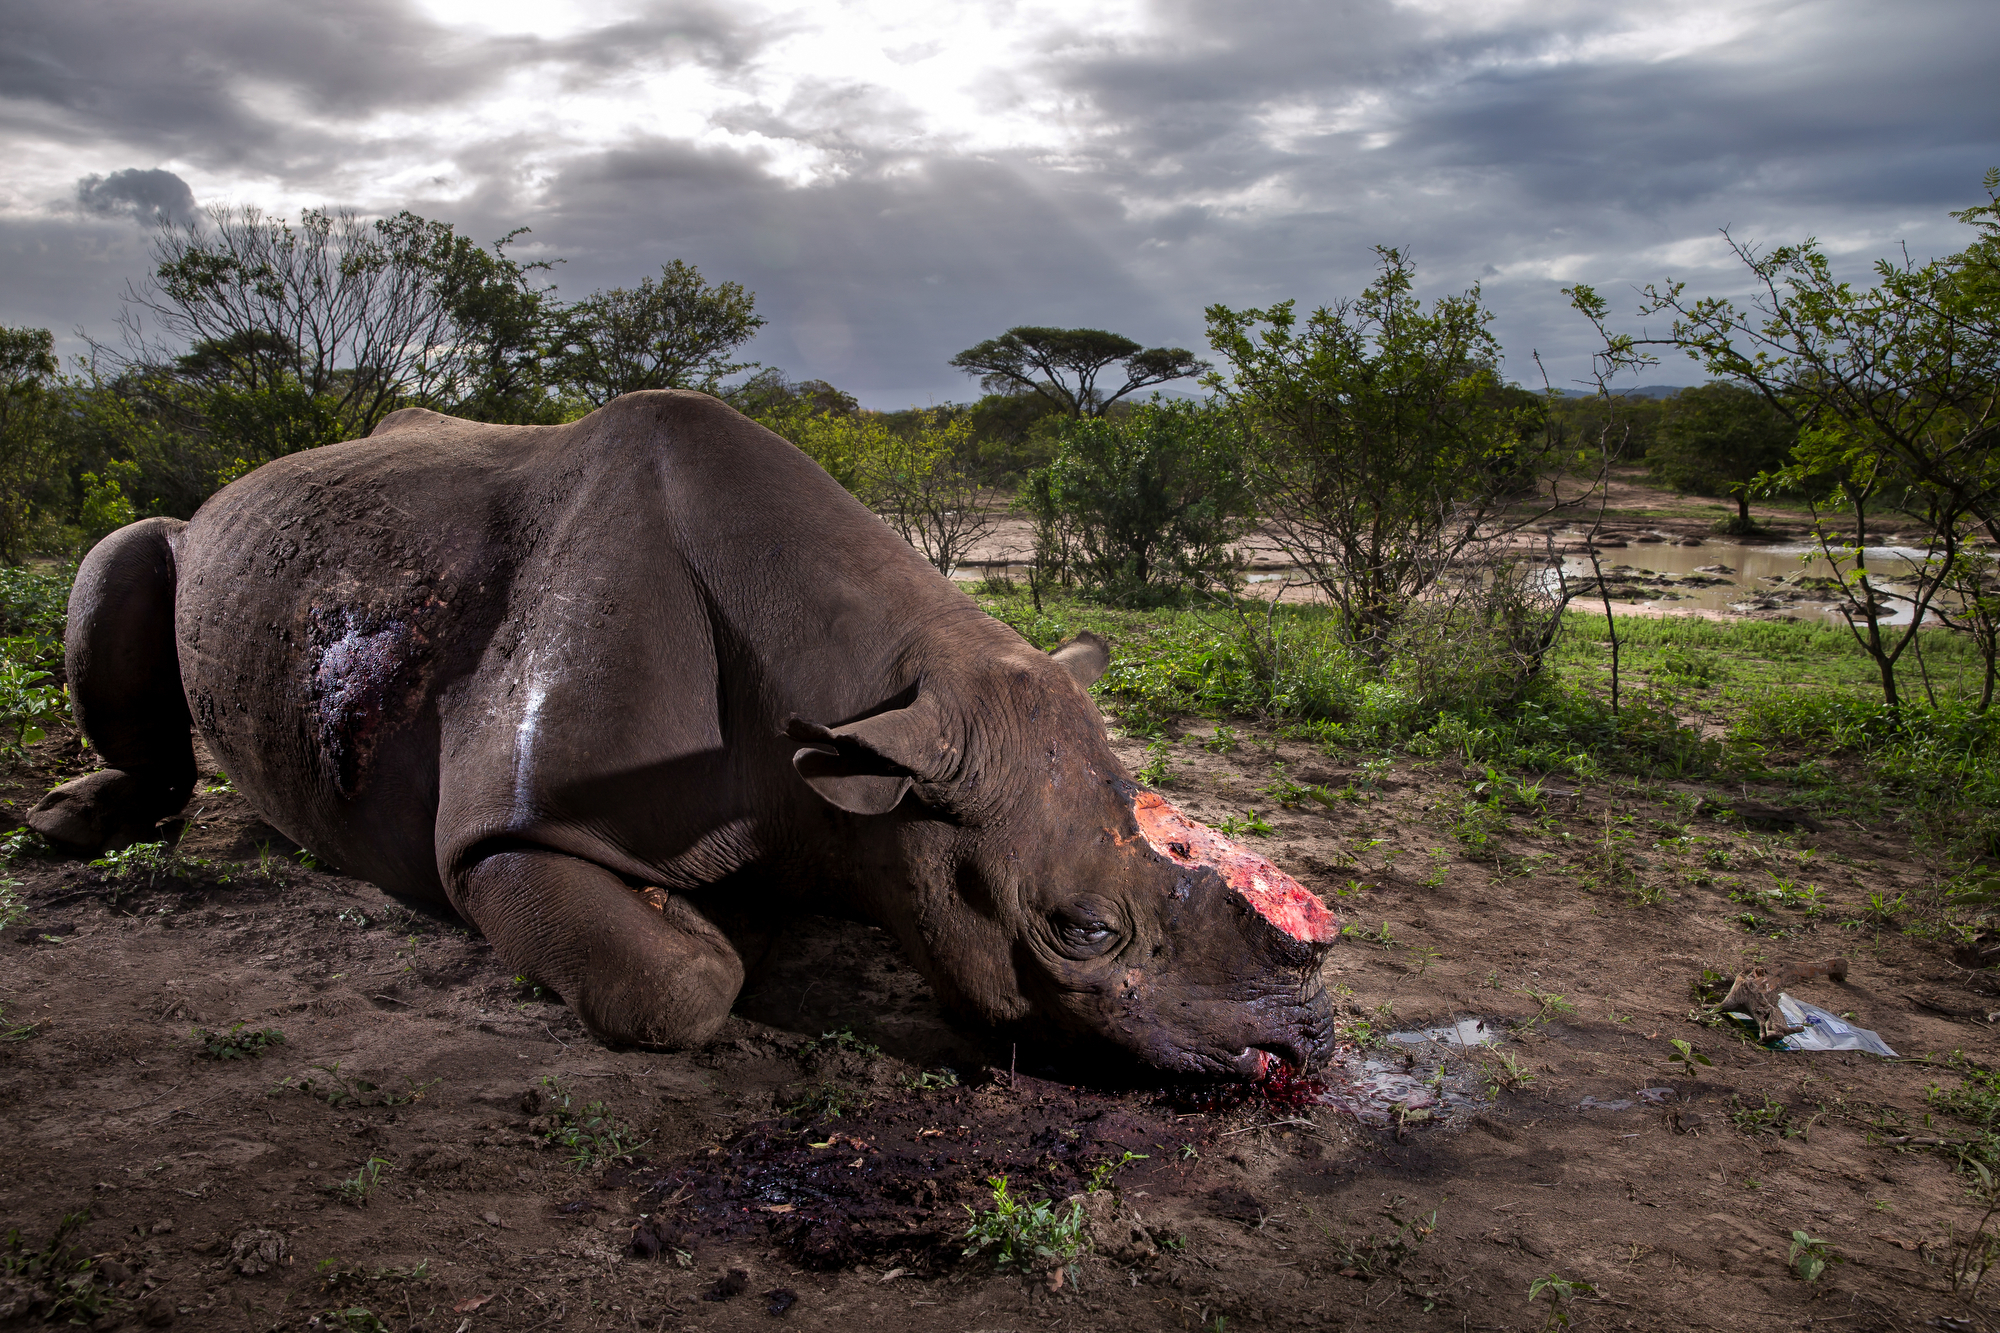 Brent Stirton, Getty Images photographer, The Deadly Rhino Horn Trade, Hluhluwe Umfolozi Game Reserve, Kwazulu Natal, South Africa, May 17, 2016.A Black Rhino Bull is seen dead, poached for its horns less than 24 hours earlier at Hluhluwe Umfolozi G…